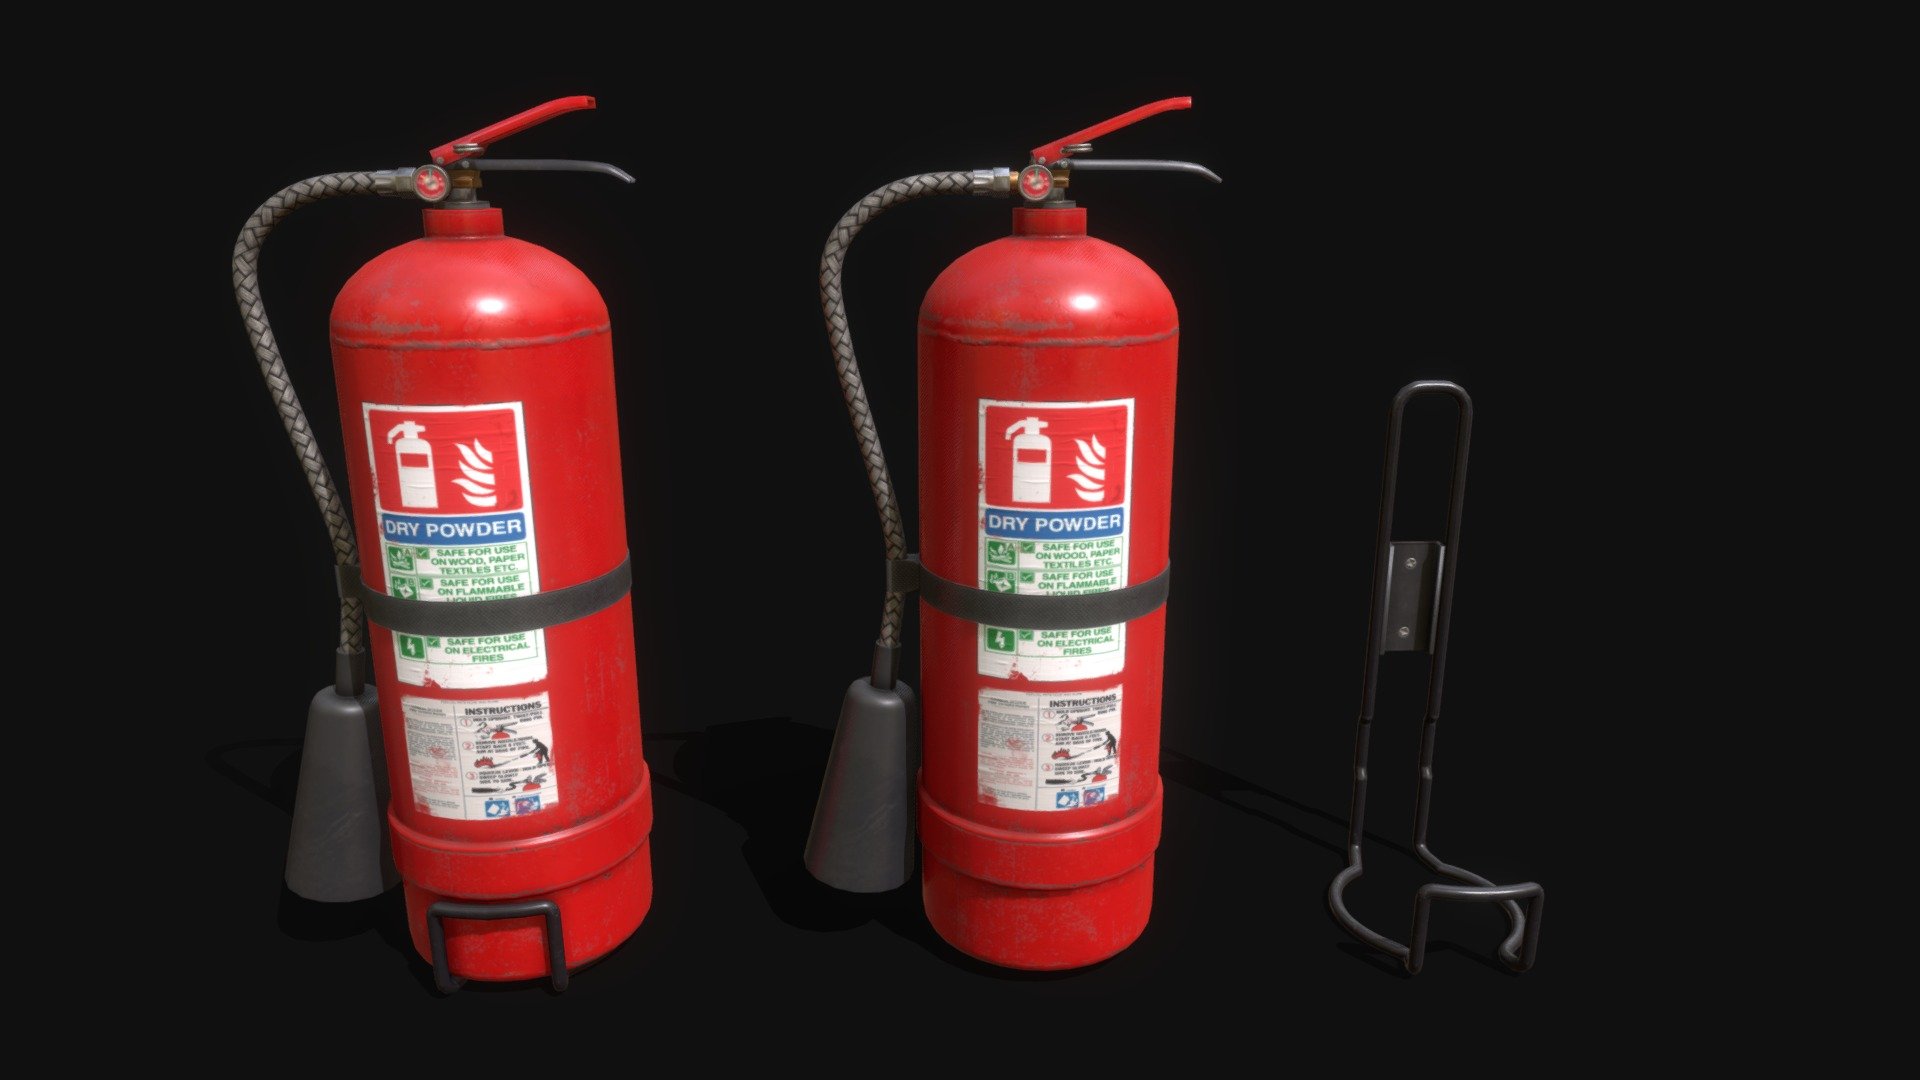 A fire extinguisher created as a prop for a larger supermarket scene 3d model